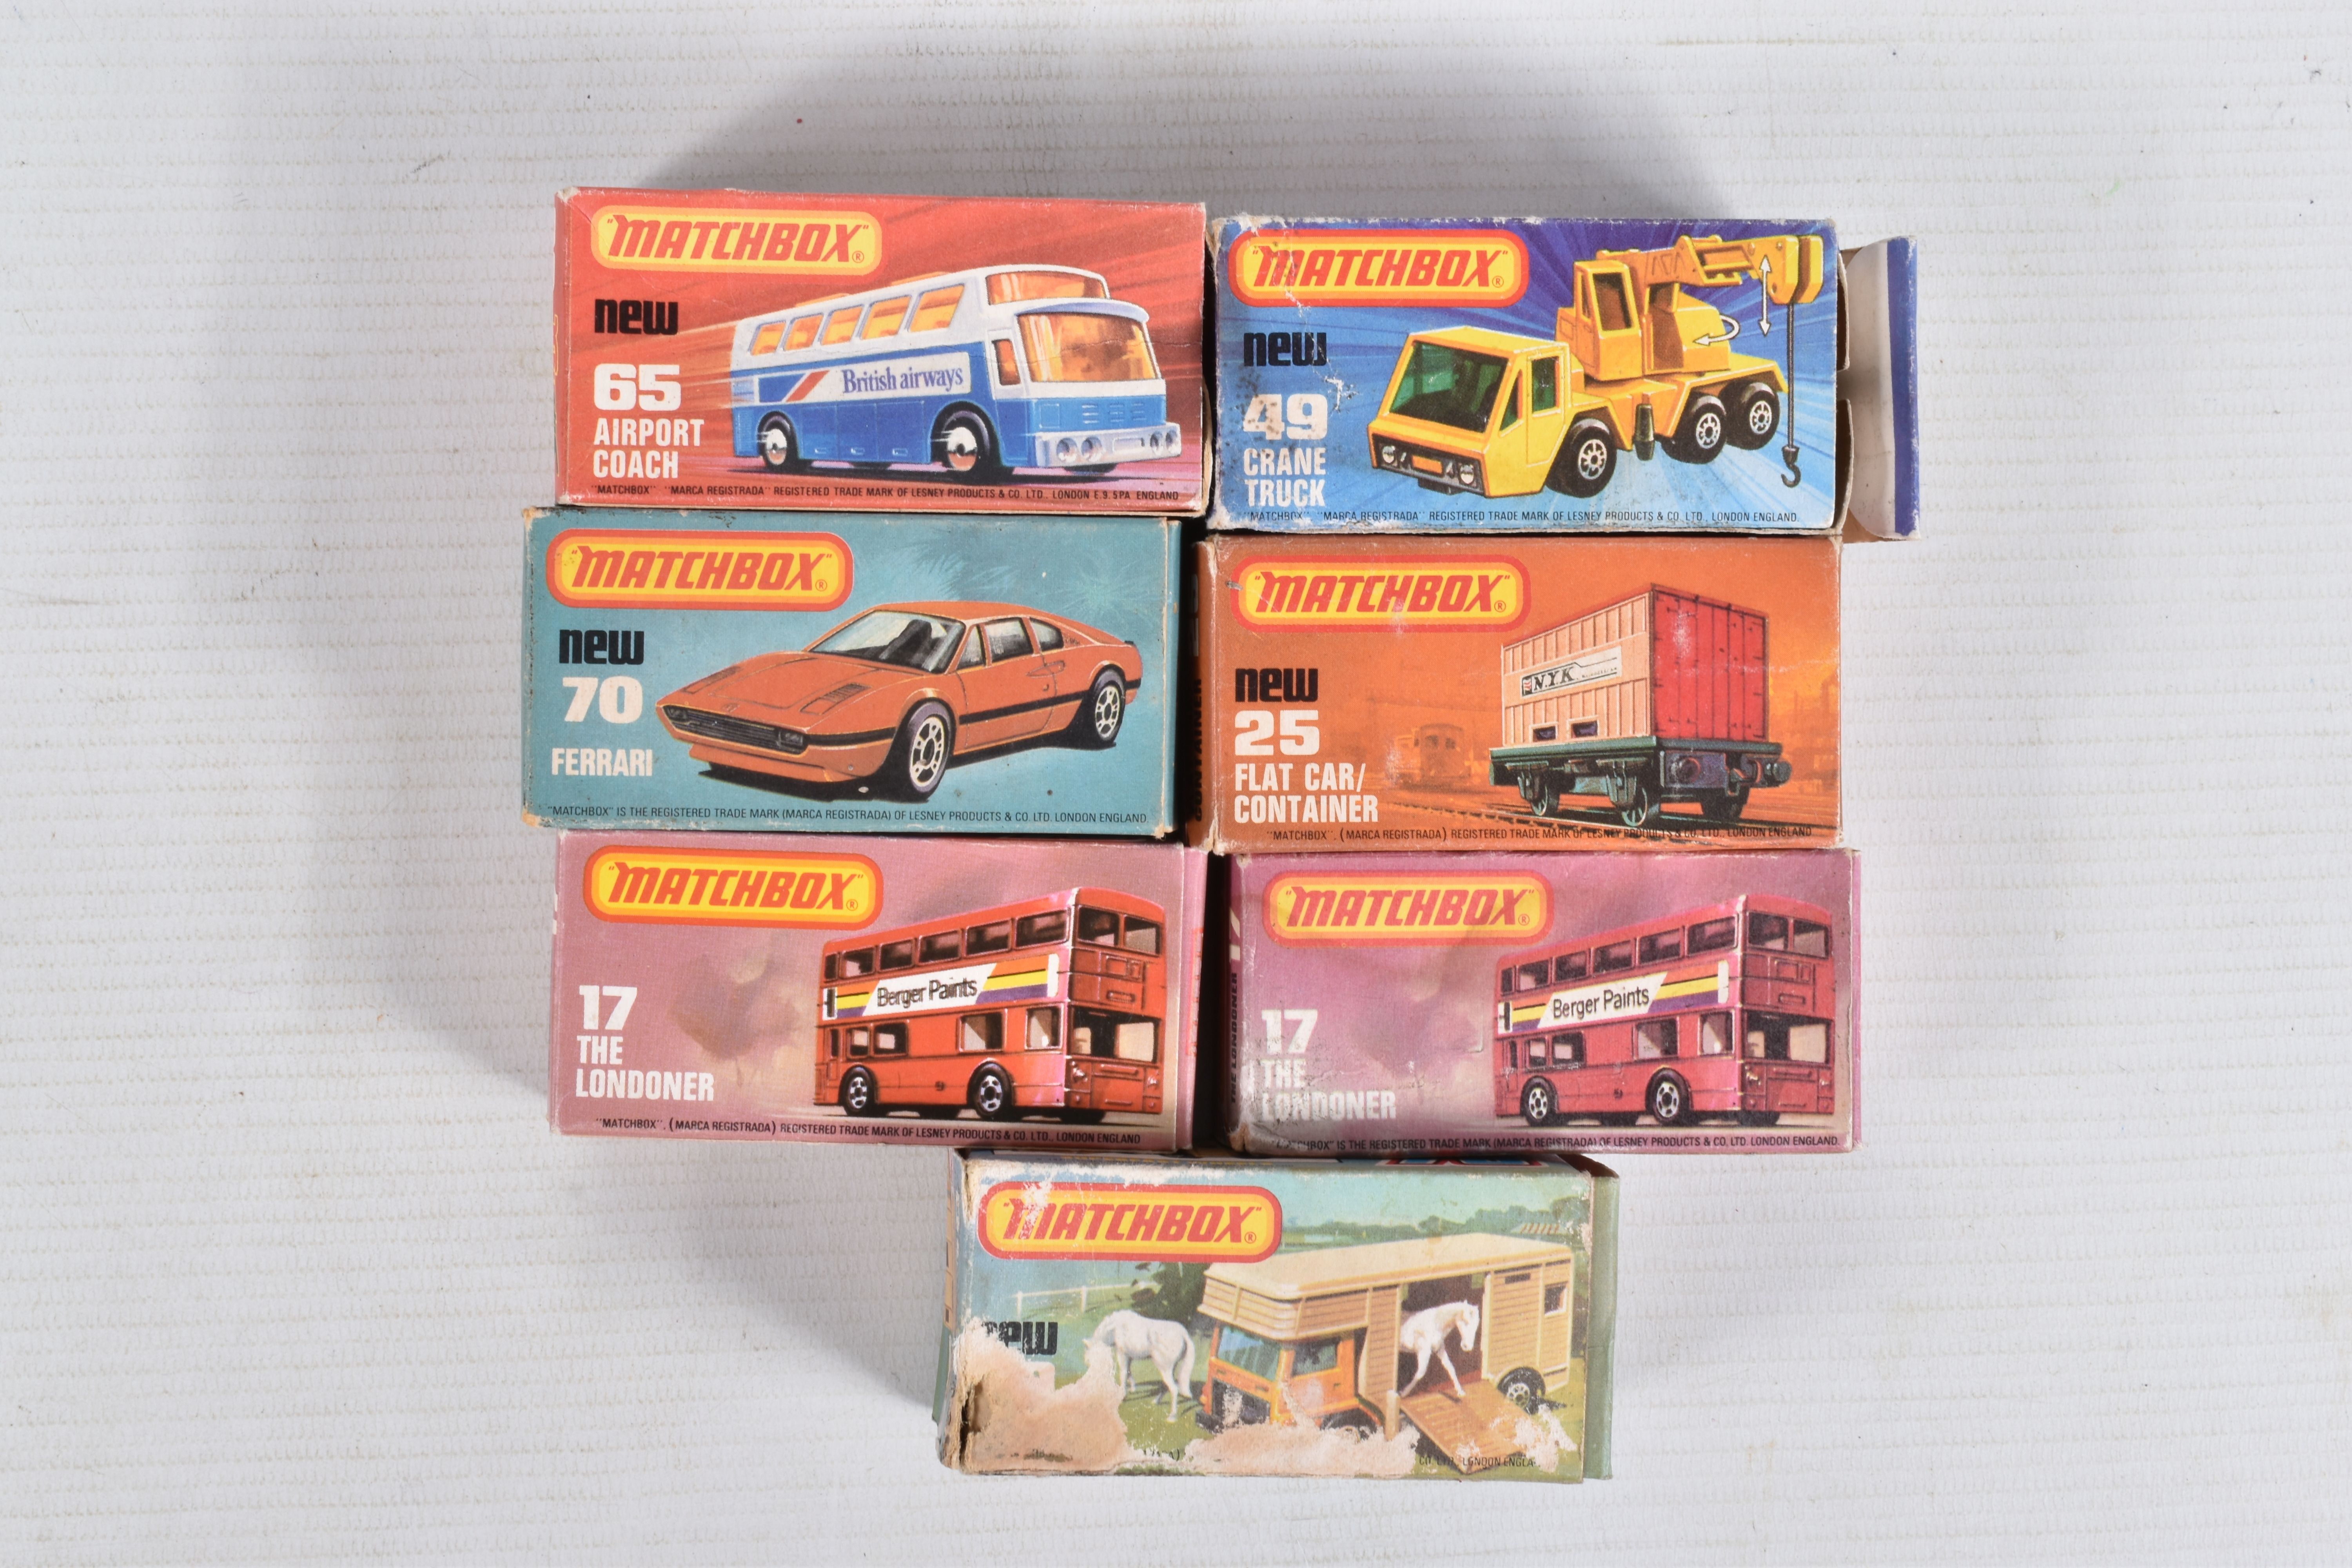 SEVEN BOXED MATCHBOX SUPERFAST DIECAST MODEL VEHICLES, the first a new no. 65 Airport Coach,